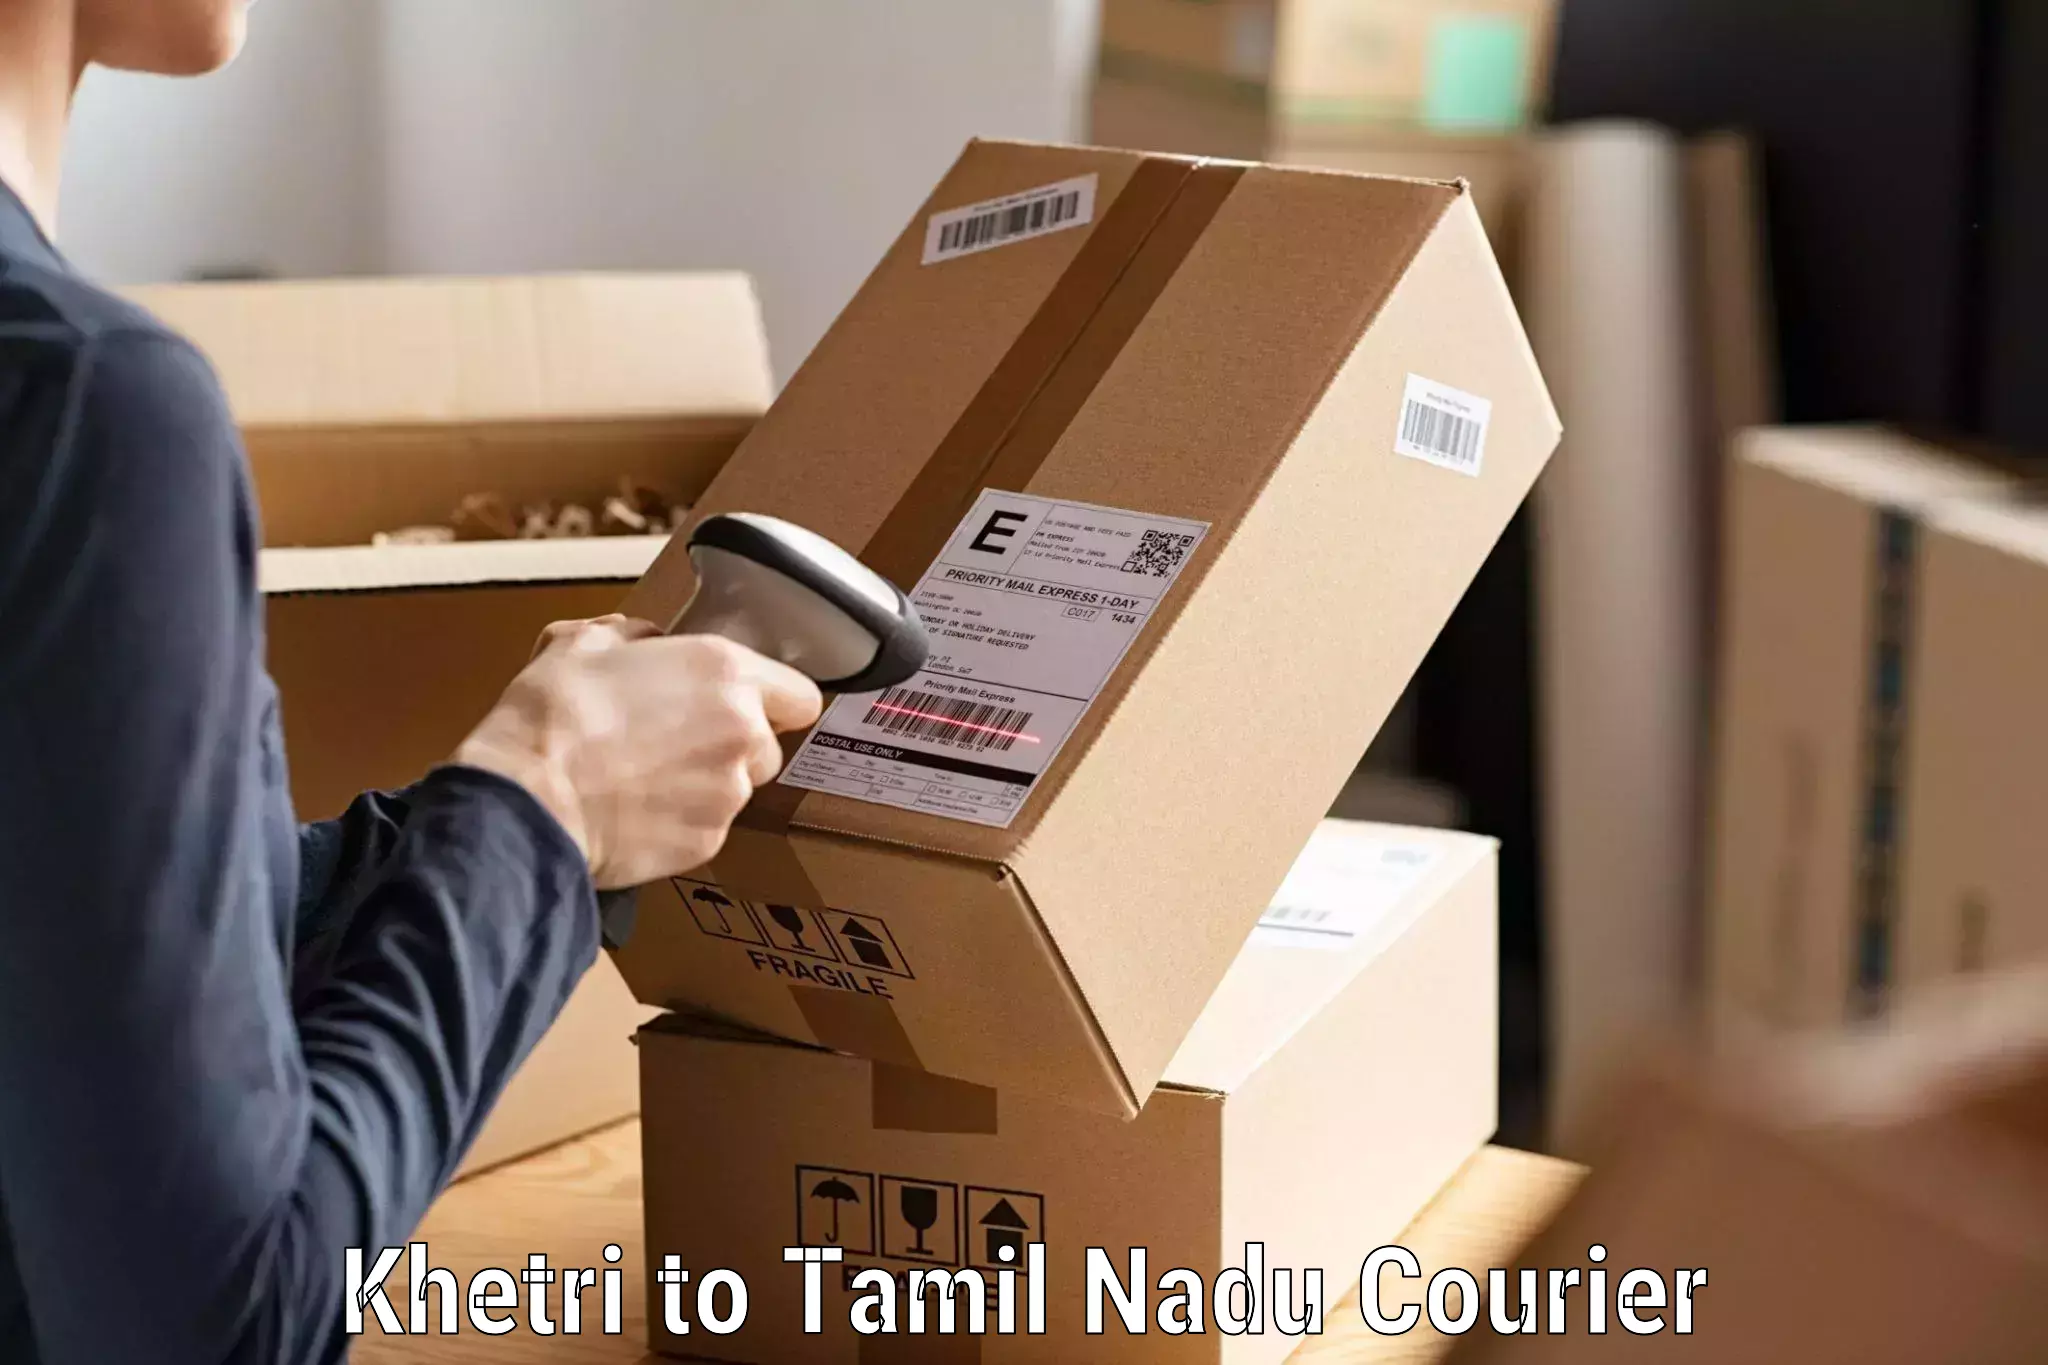 Courier service booking Khetri to Thanjavur